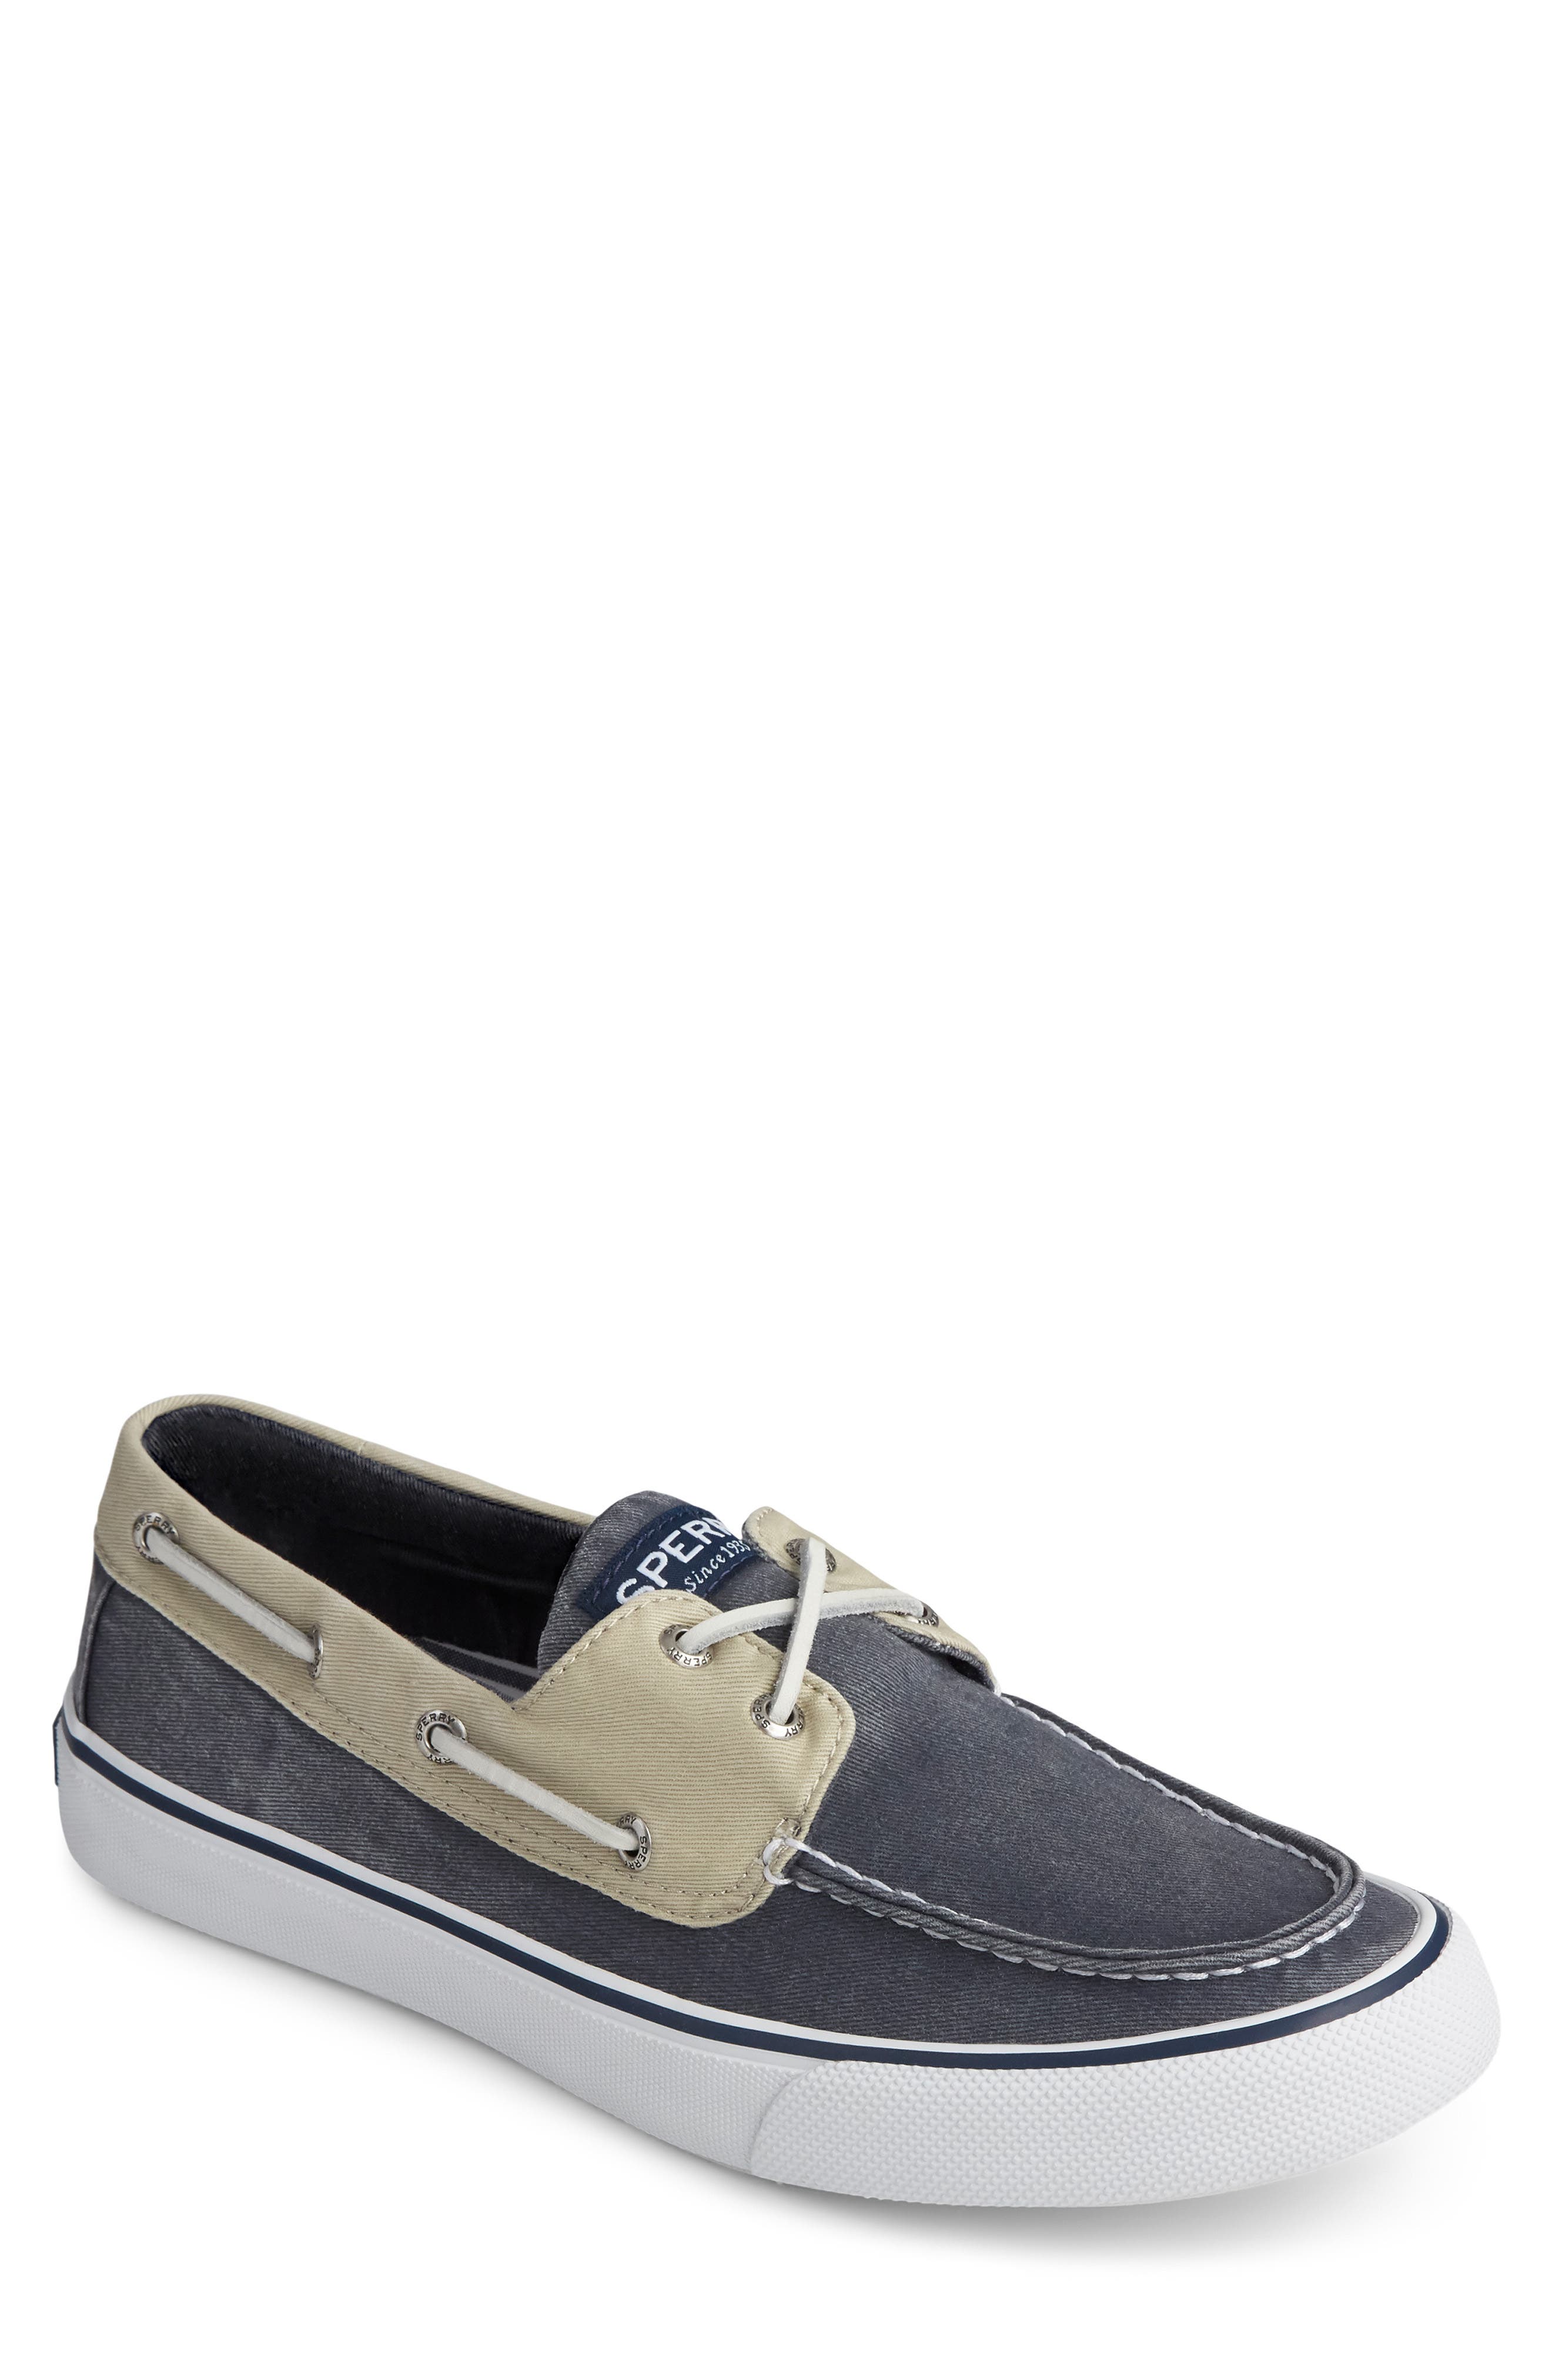 Sperry Top-SiderSperry Bahama 2eye Marque  Chaussures voile homme 